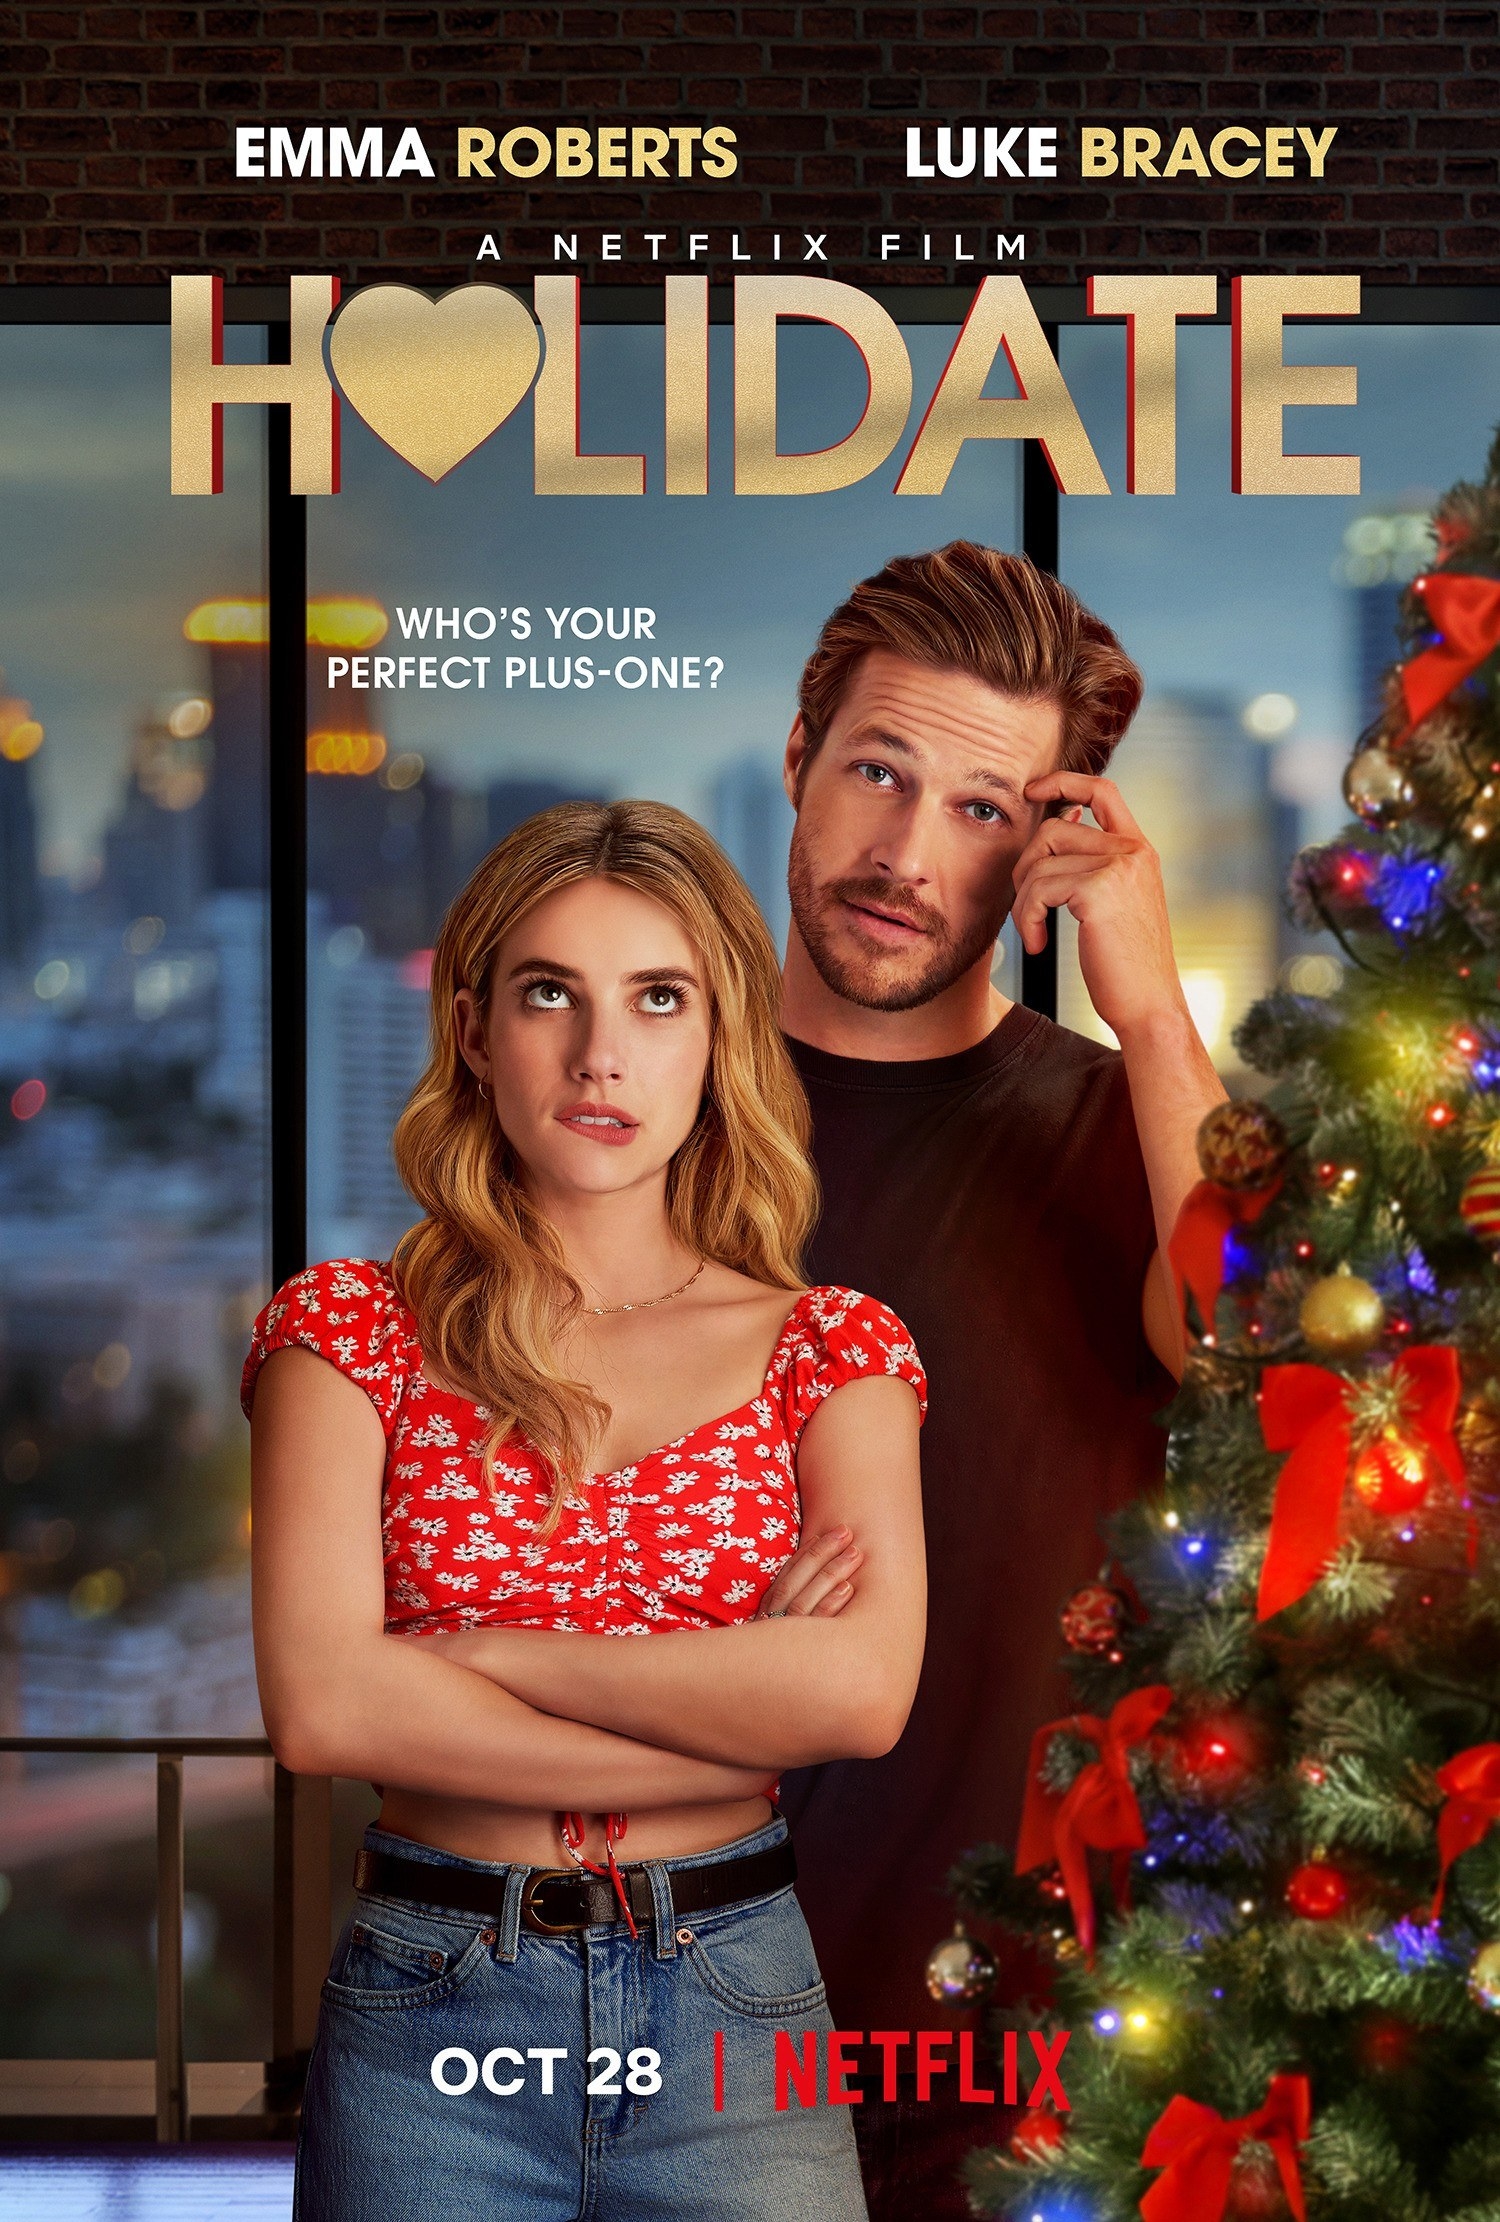 Movie poster for Holidate shows photo of Emma Roberts and Luke Bracey standing in front of a Christmas tree